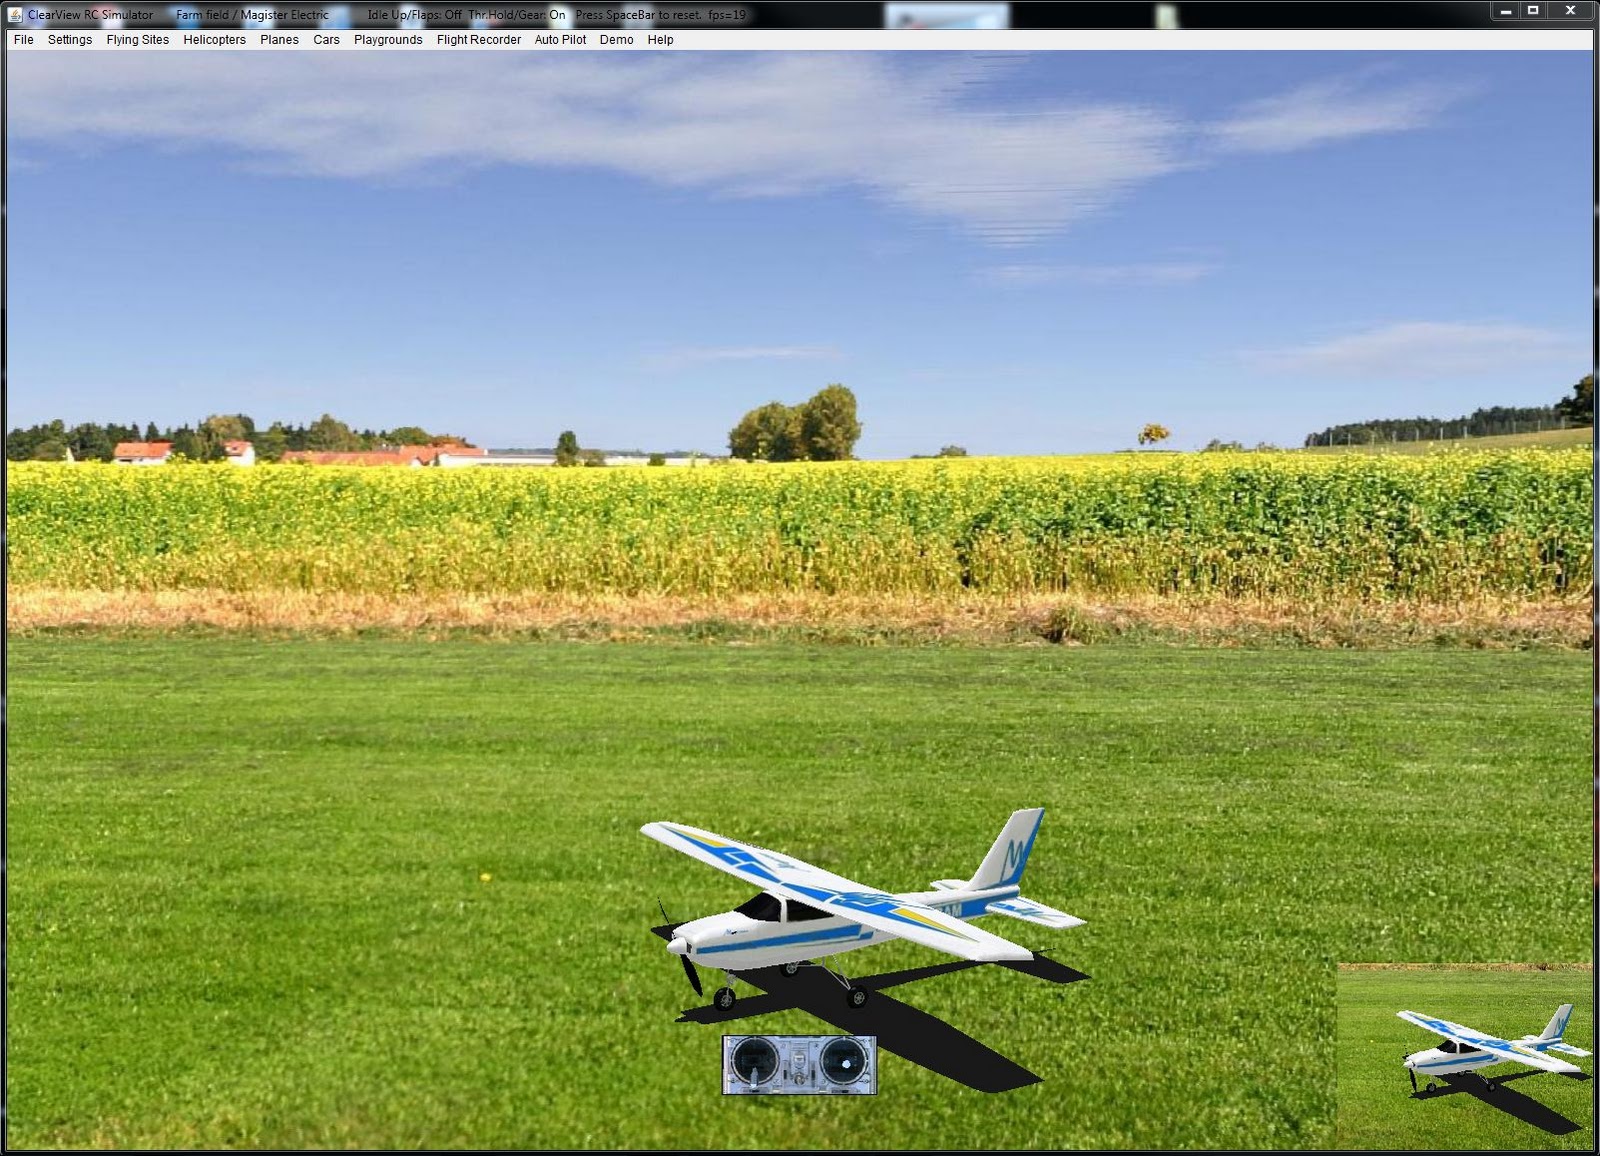 clearview-rc-flight-simula-x64-file-iso-full-pc